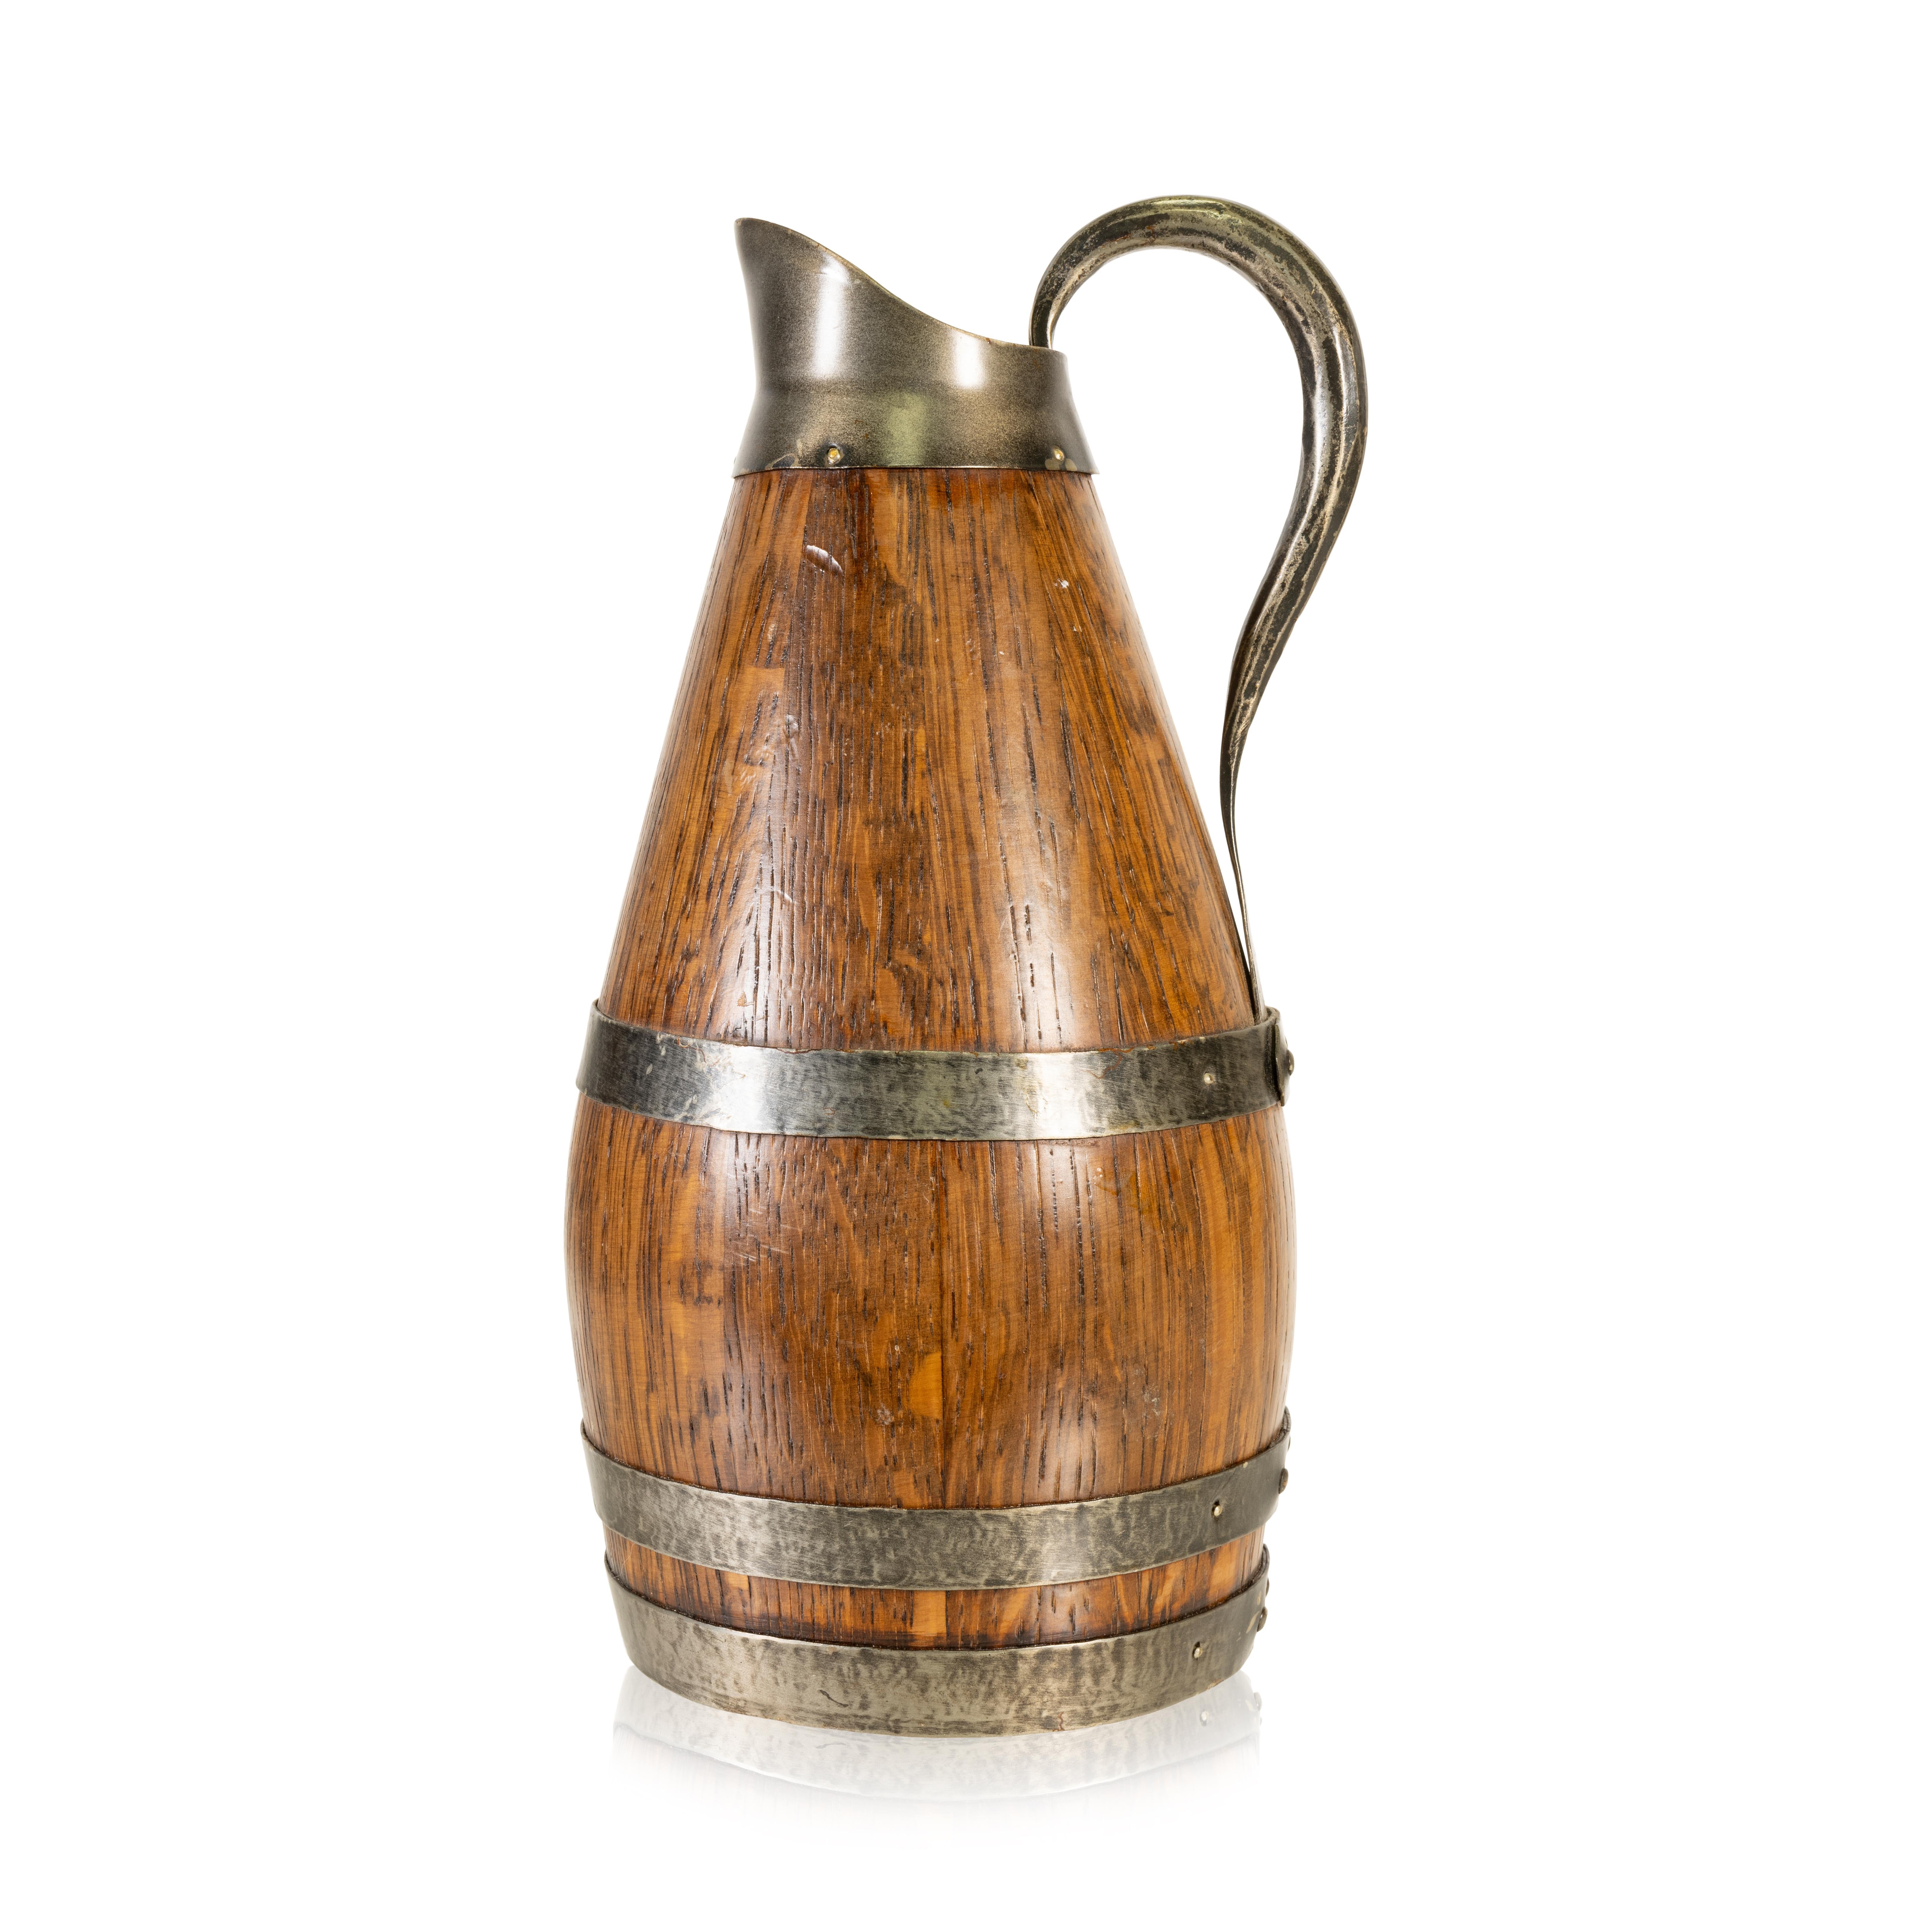 French alascian wine pitcher. Oak with hammered nickel banding. A great barware piece!

Period: Early 20th Century
Origin: France
Size: 10